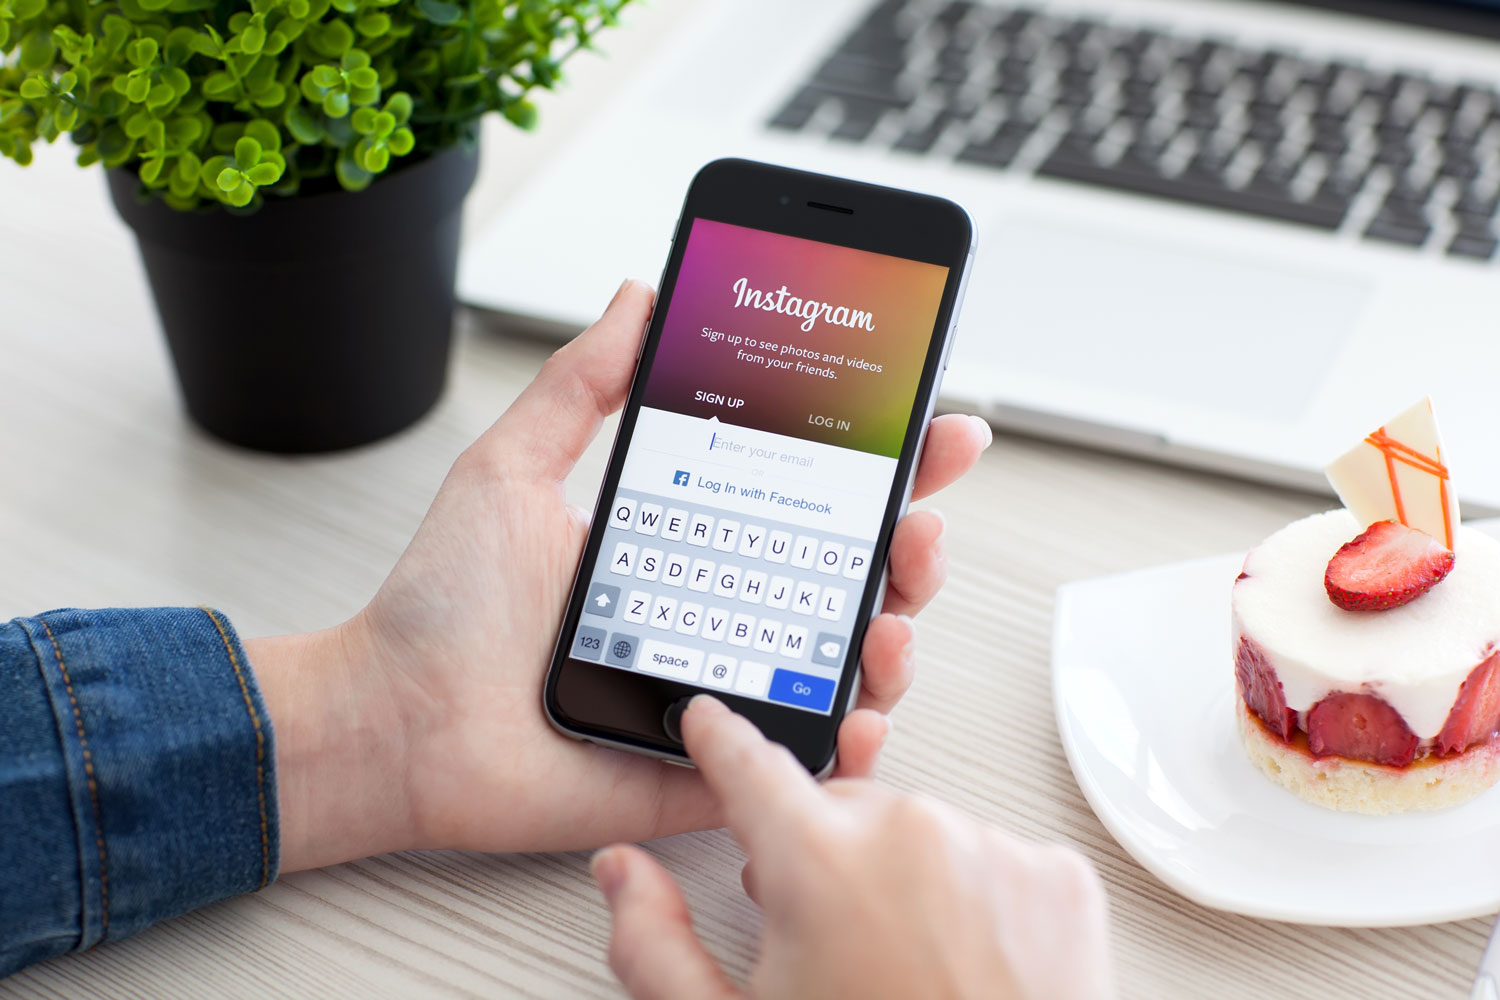 Instagram adds new features to curb abuse, foster a positive community